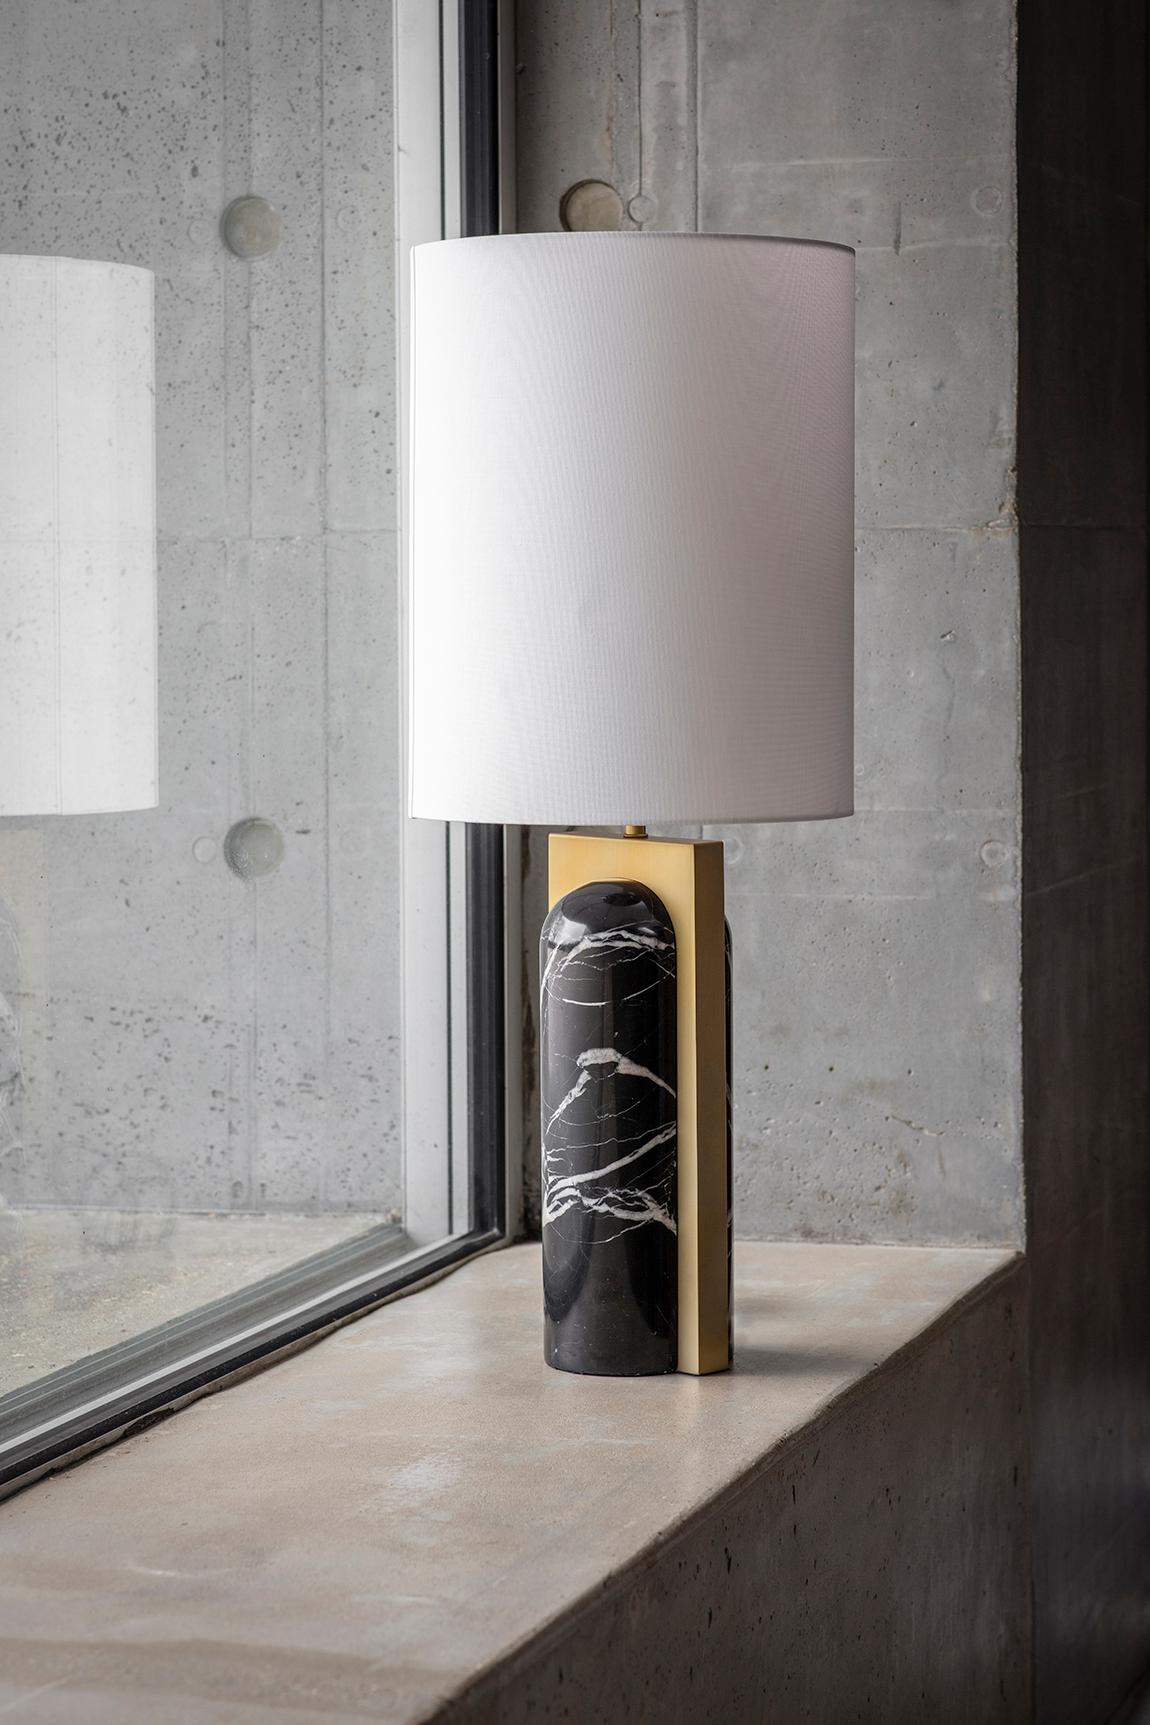 Set of 2 Book Ends Table Lamps by Square in Circle
Dimensions: D 35 x H 84 cm
Materials: Brushed brass/ black marble/ white cotton shade
Other finishes available.

The refined contemporary style of this table lamp is crafted from a tapered and